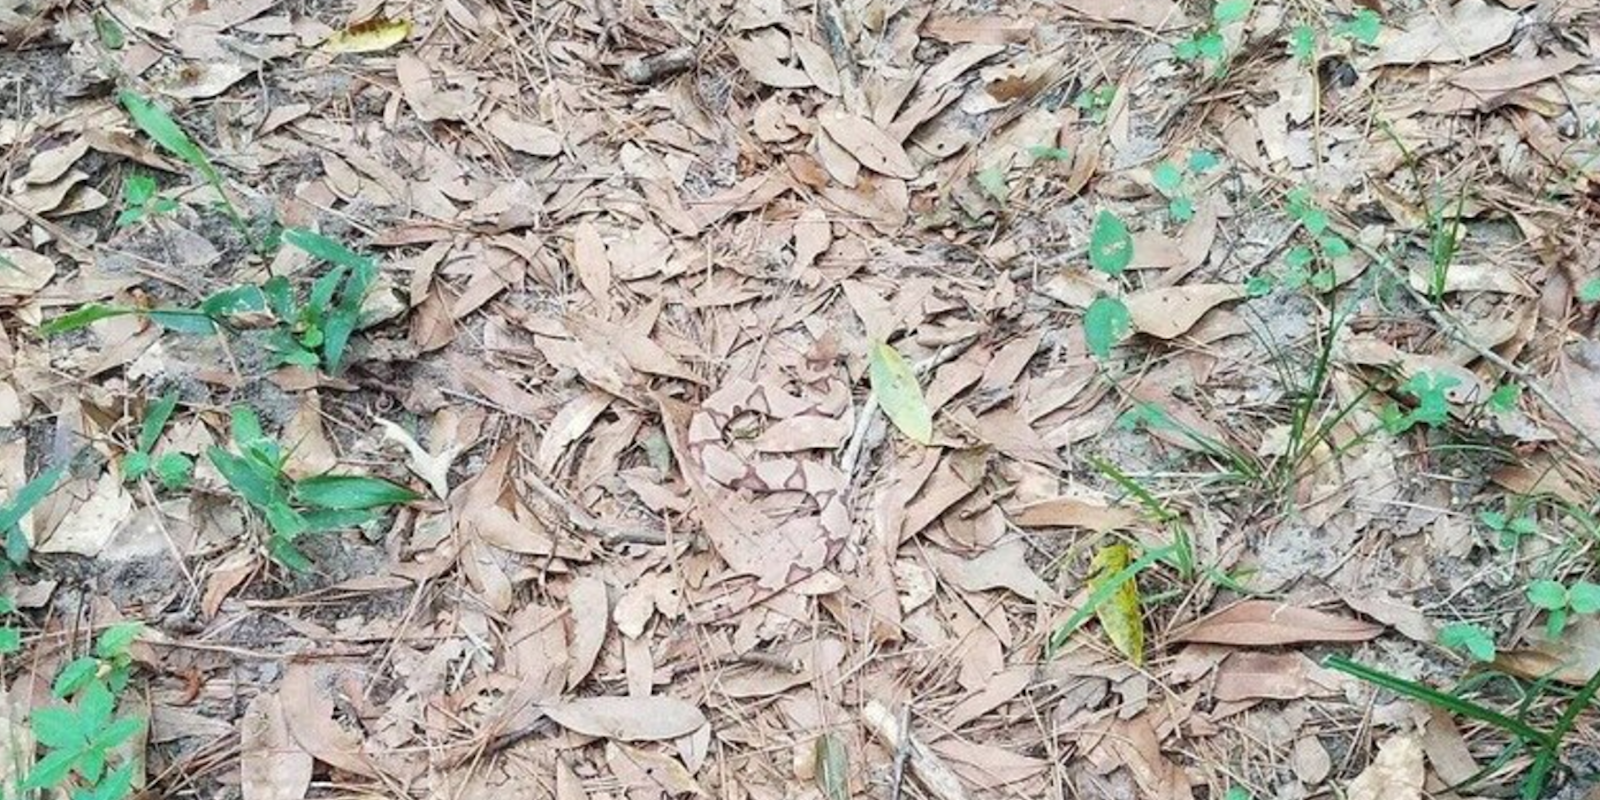 Can you spot the snake